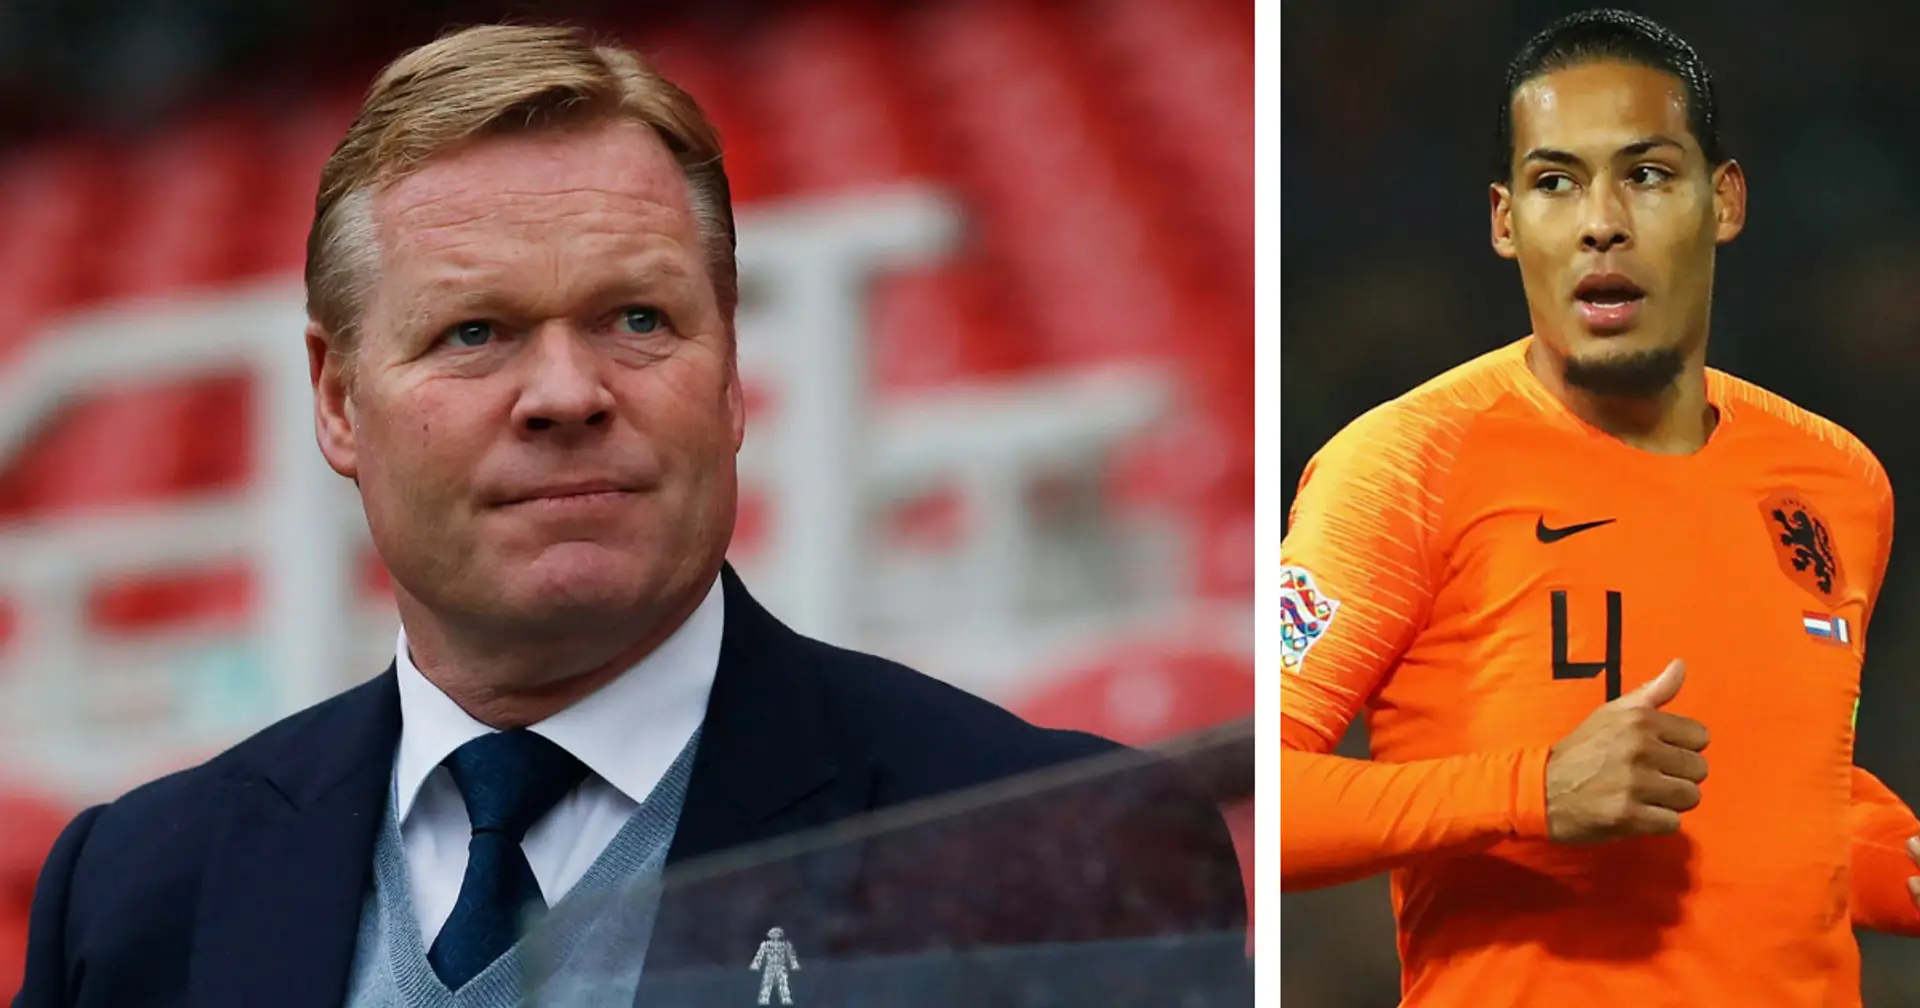 Why Koeman is perfect for squad morale, even Van Dijk praises him: 2 things he did for Dutch squad to make everyone feel good and equal